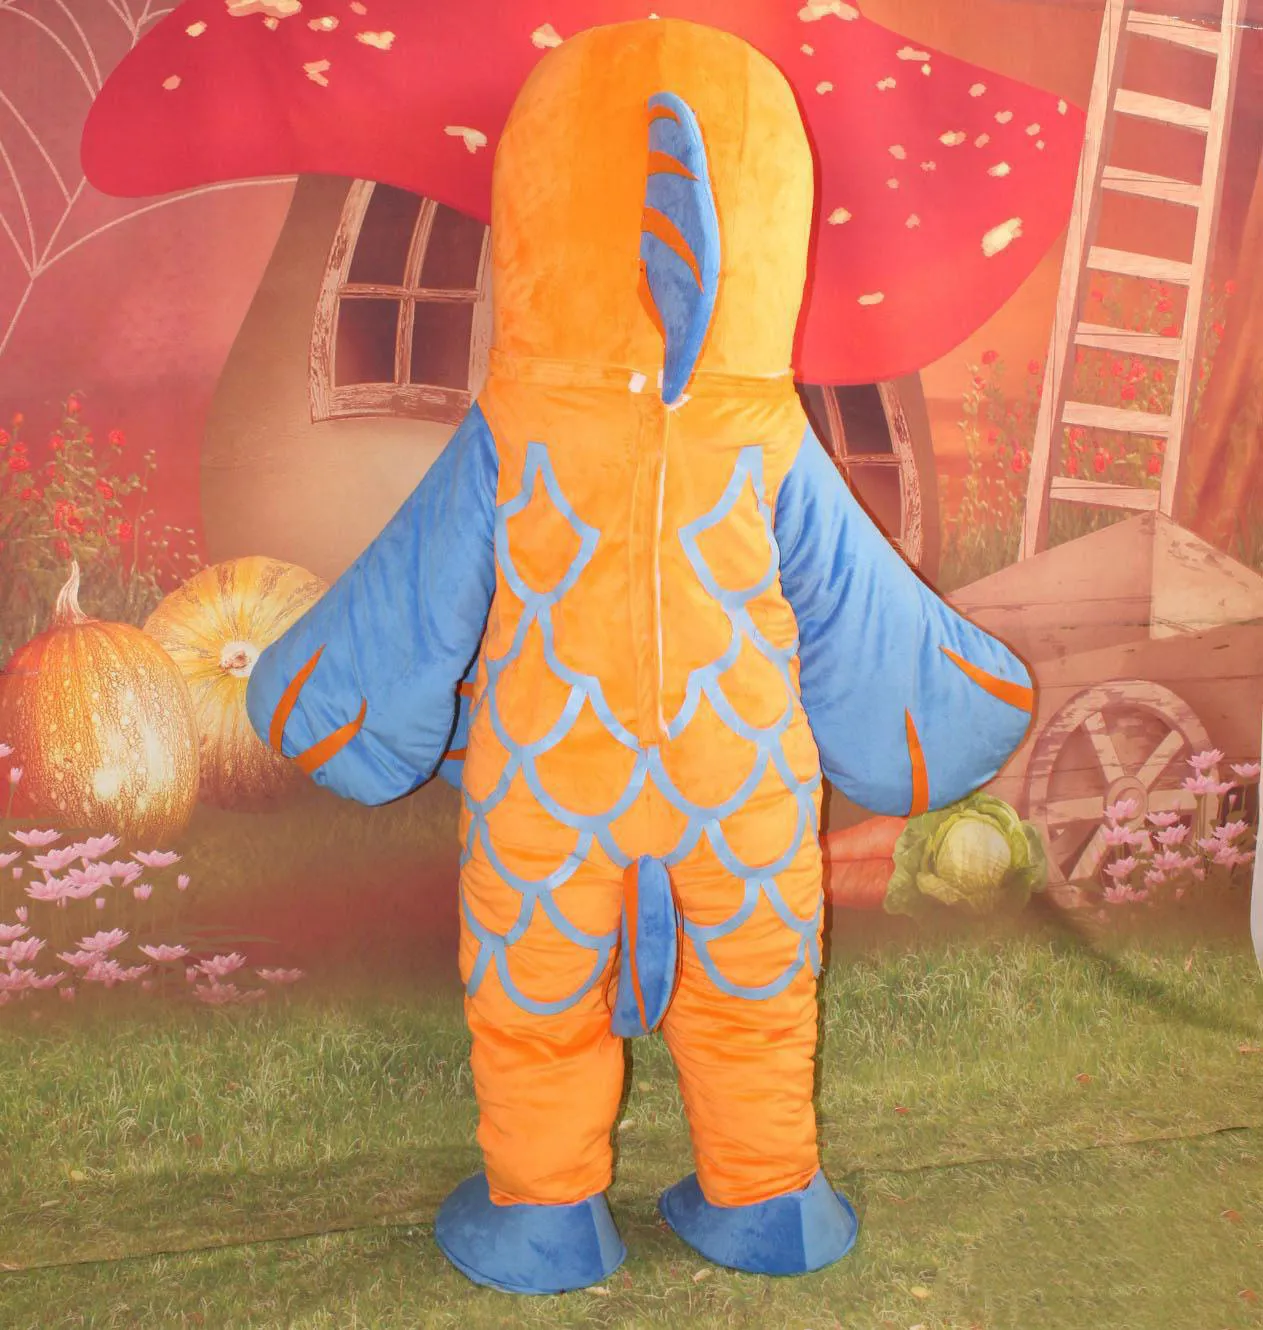 Golden Flowerhorn Fish Mascot Suit High Quality Adult Costume For A Fun And  Comfortable Look From Walmartstores666, $171.68